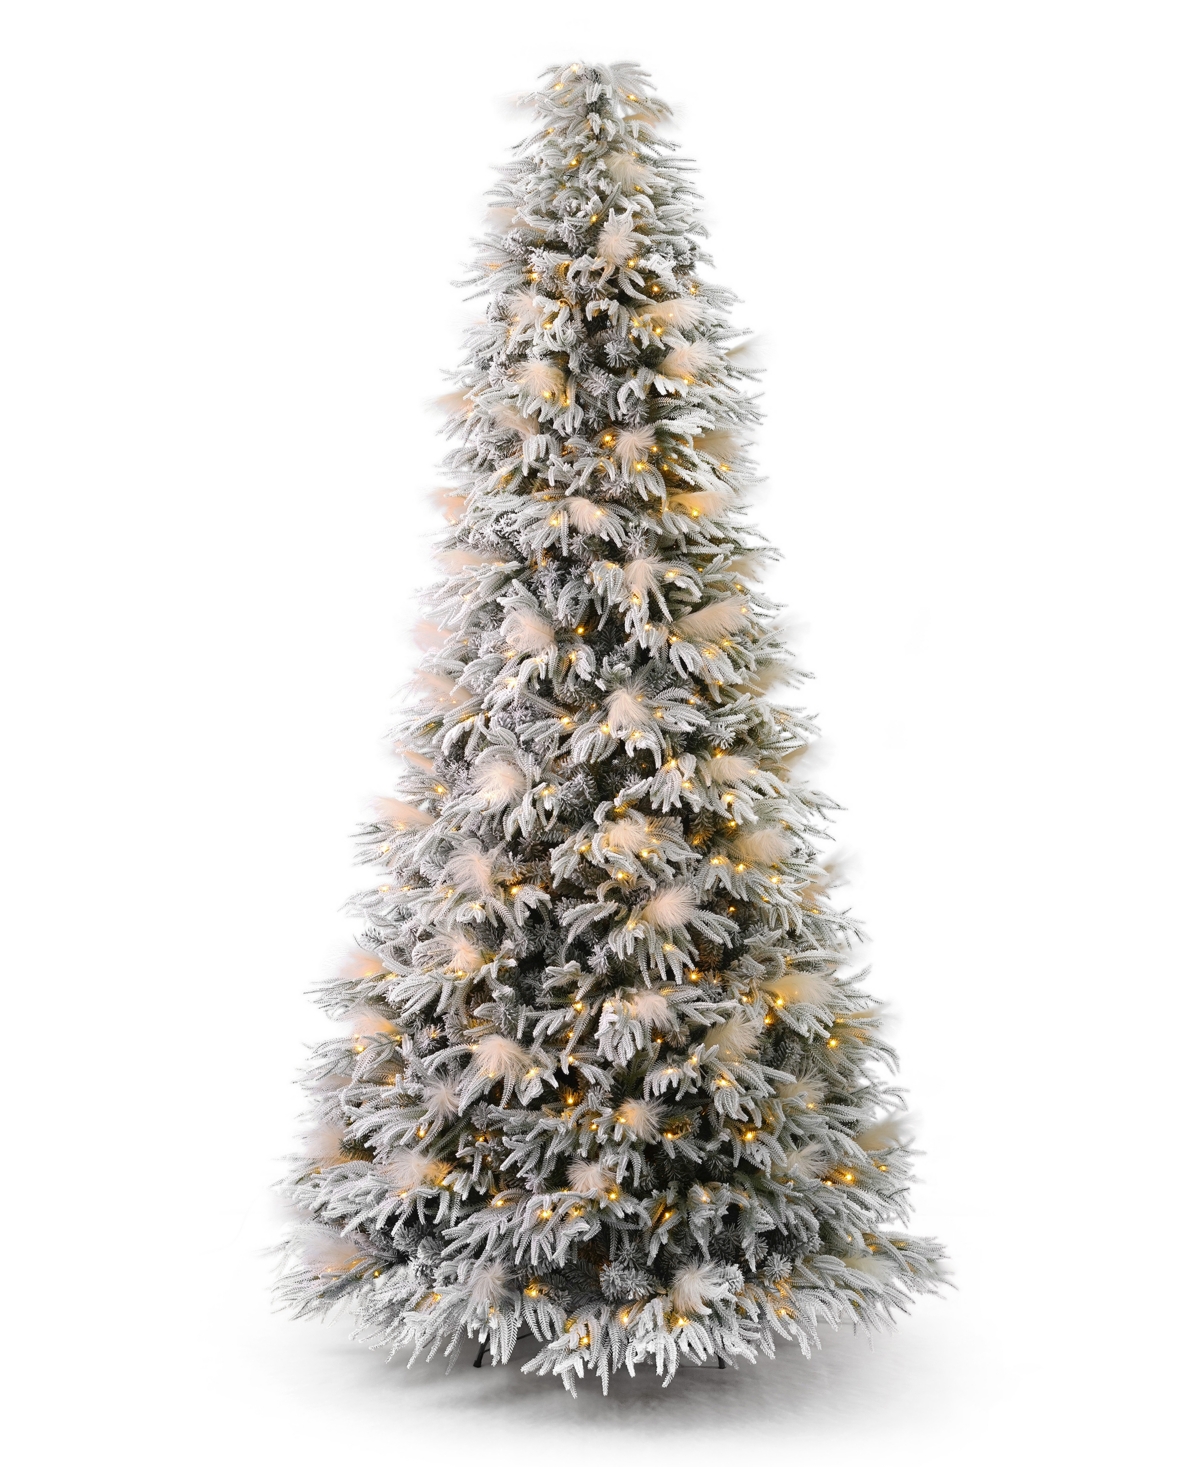 Pine and Pampas 9' Pre-Lit Flocked Pe Mixed Pvc Tree, 9590 Tips, 104 Pieces Pampas, 700 Warm Led, Ez-Connect, Remote, Storage Bag - Green